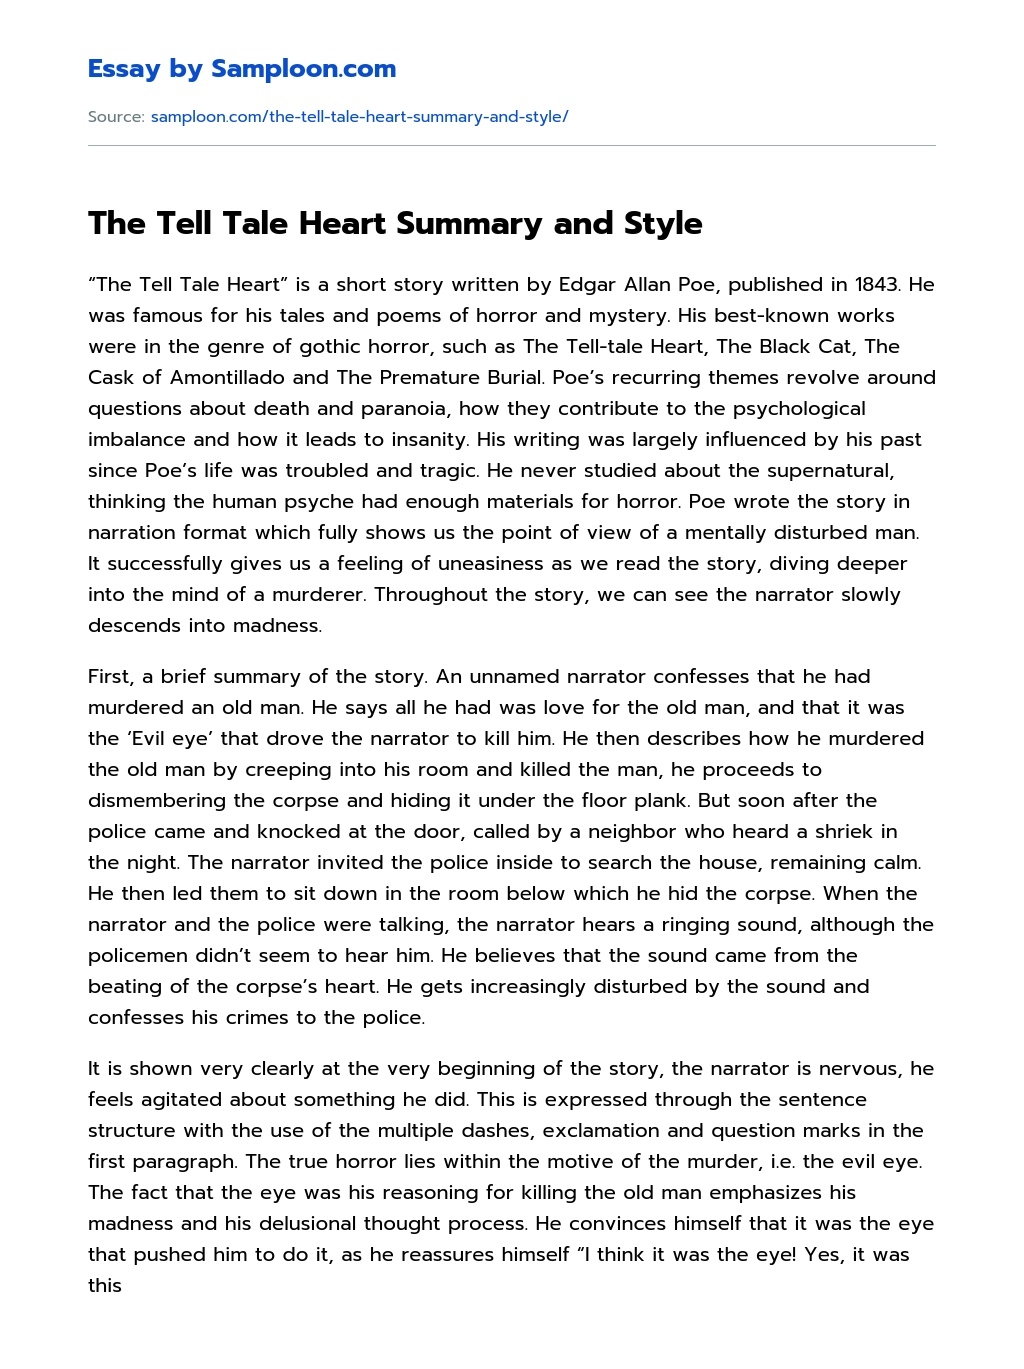 The Tell Tale Heart Summary and Style essay